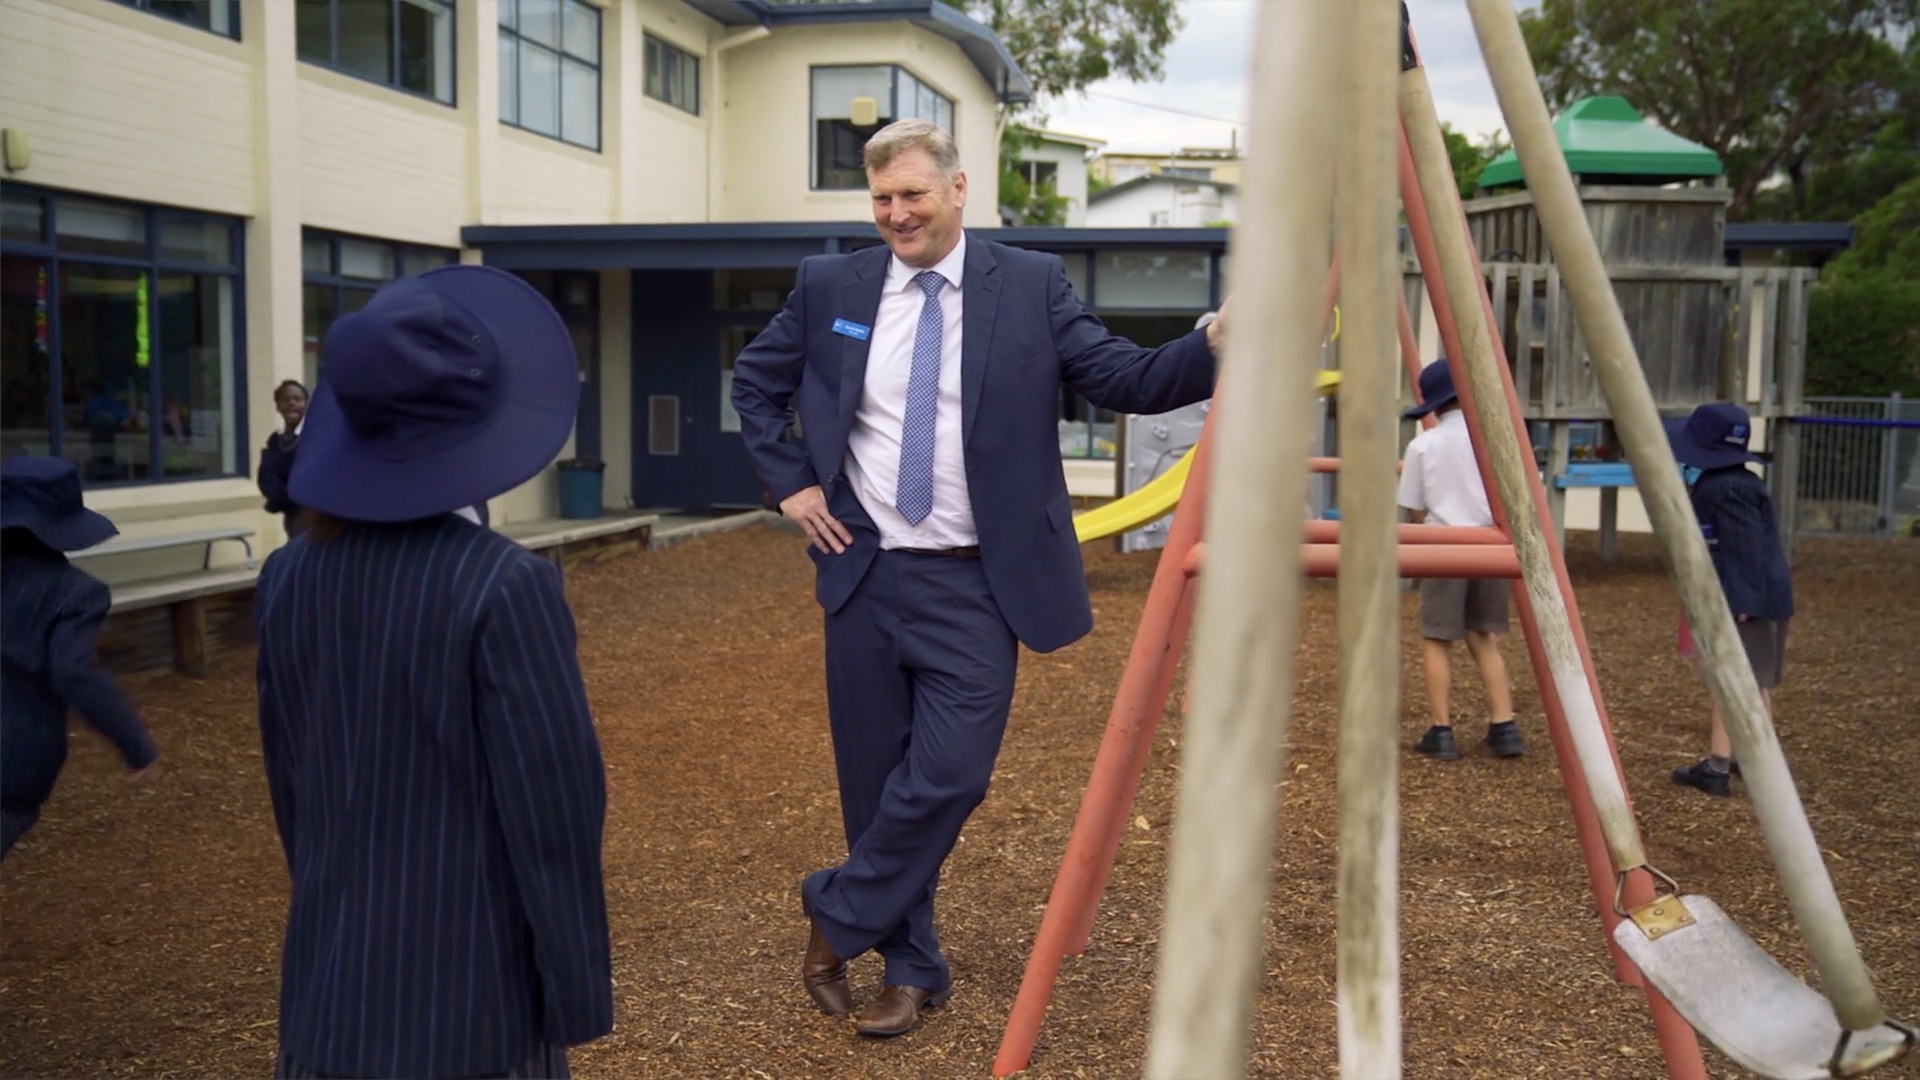 ACC Hobart principal David Noble interacting with students in the school playground